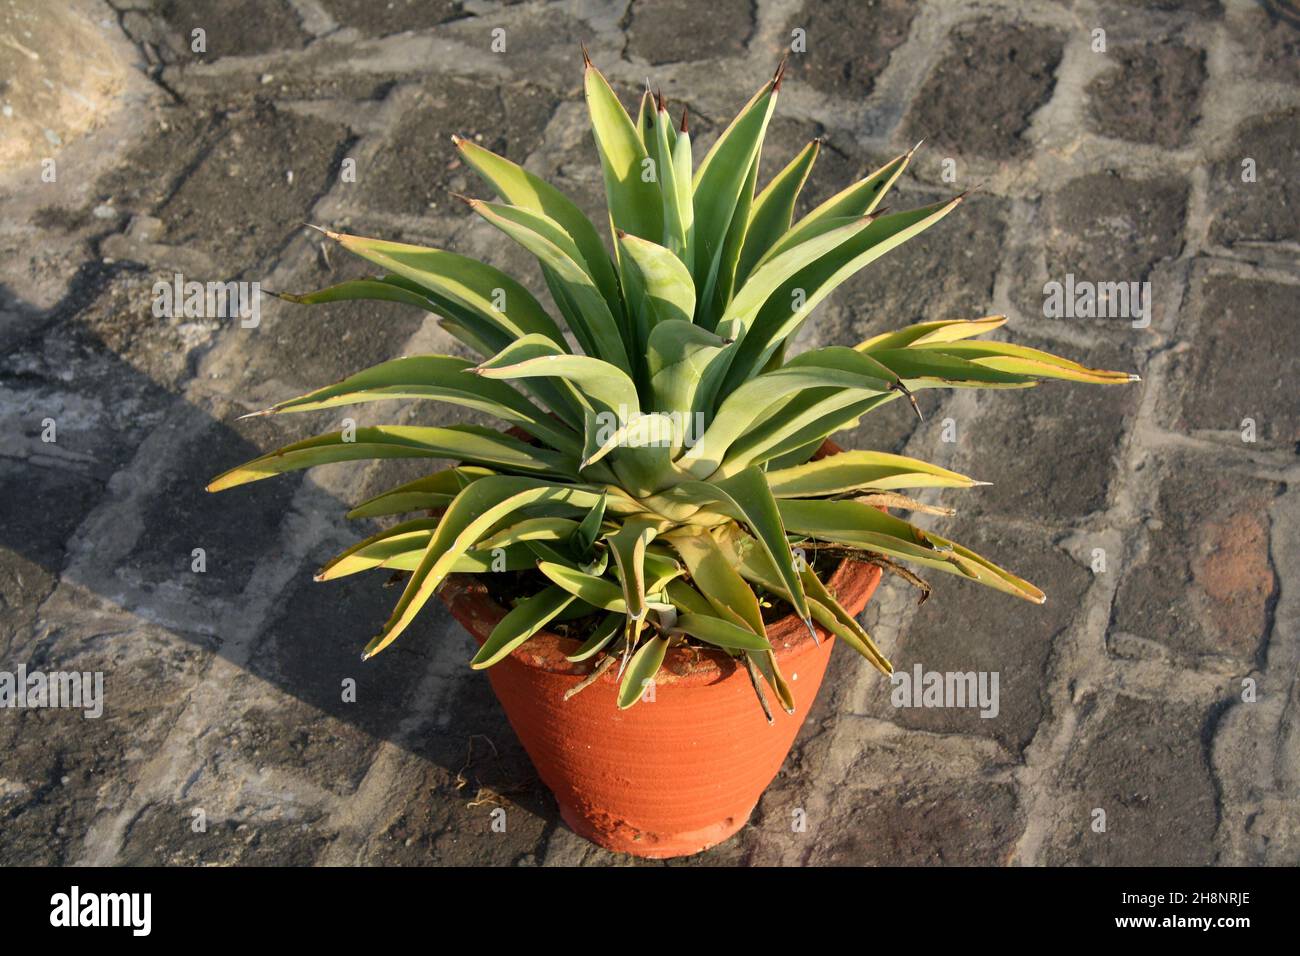 Lion's tail (Agave attenuata) plant in a flower pot : (pix SShukla) Stock Photo